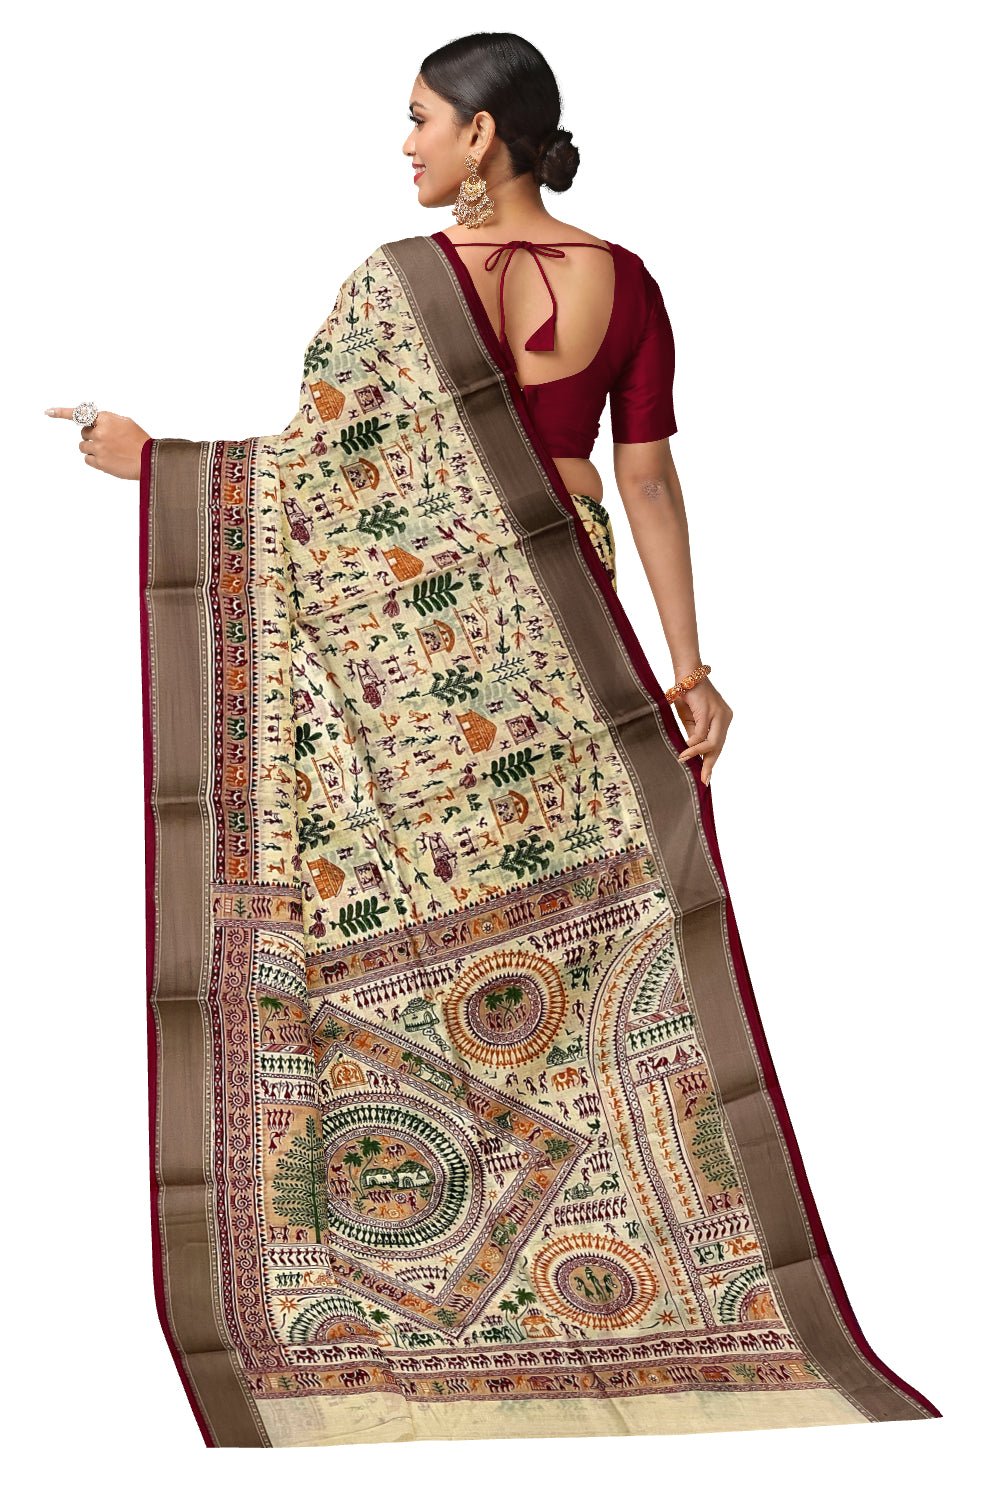 Southloom Cotton Light Brown Saree with Warli Art Printed Designs